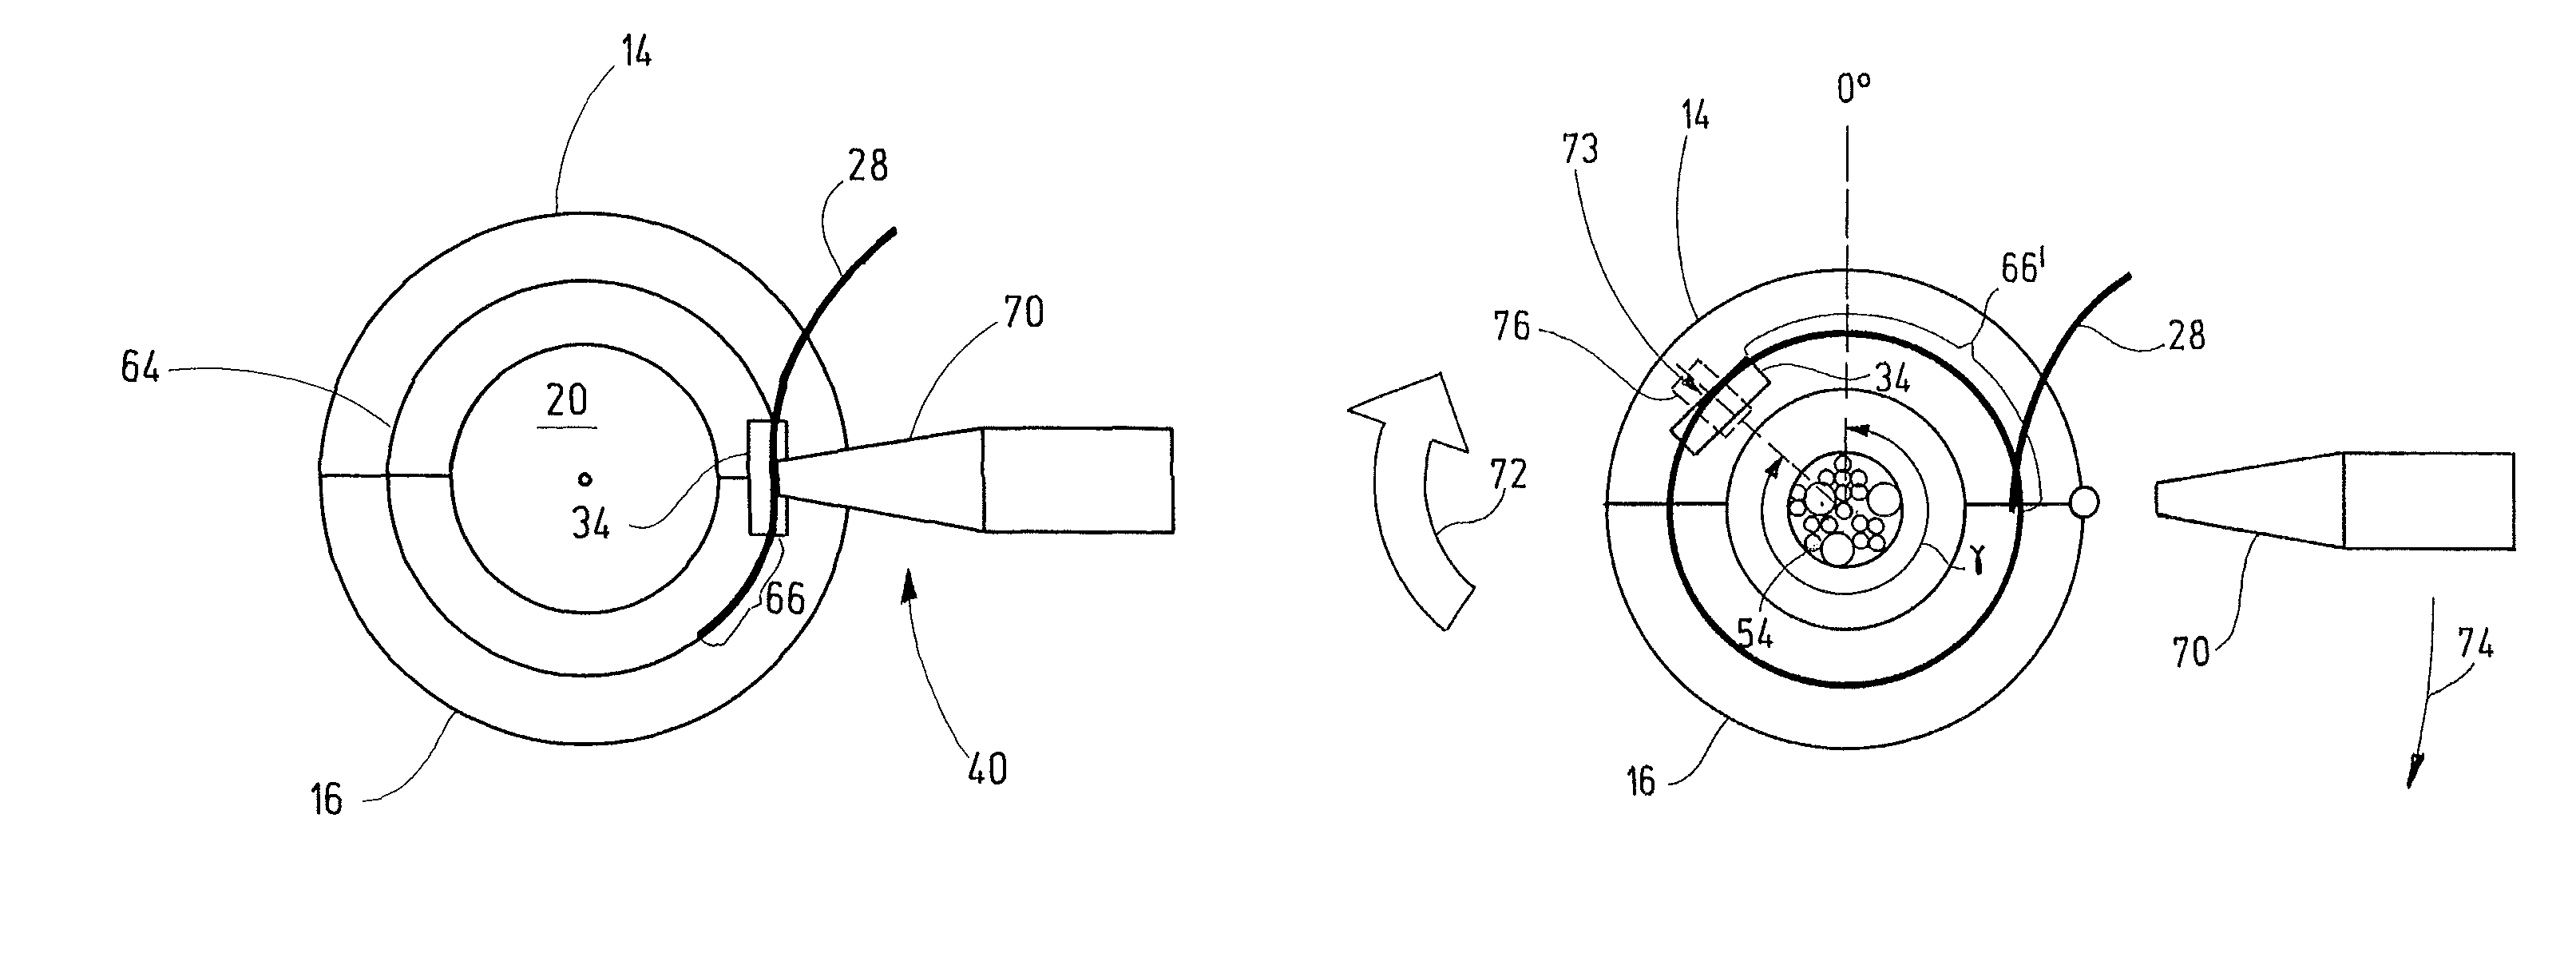 Apparatus and method for automatically, circumferentially wrapping a cable harness